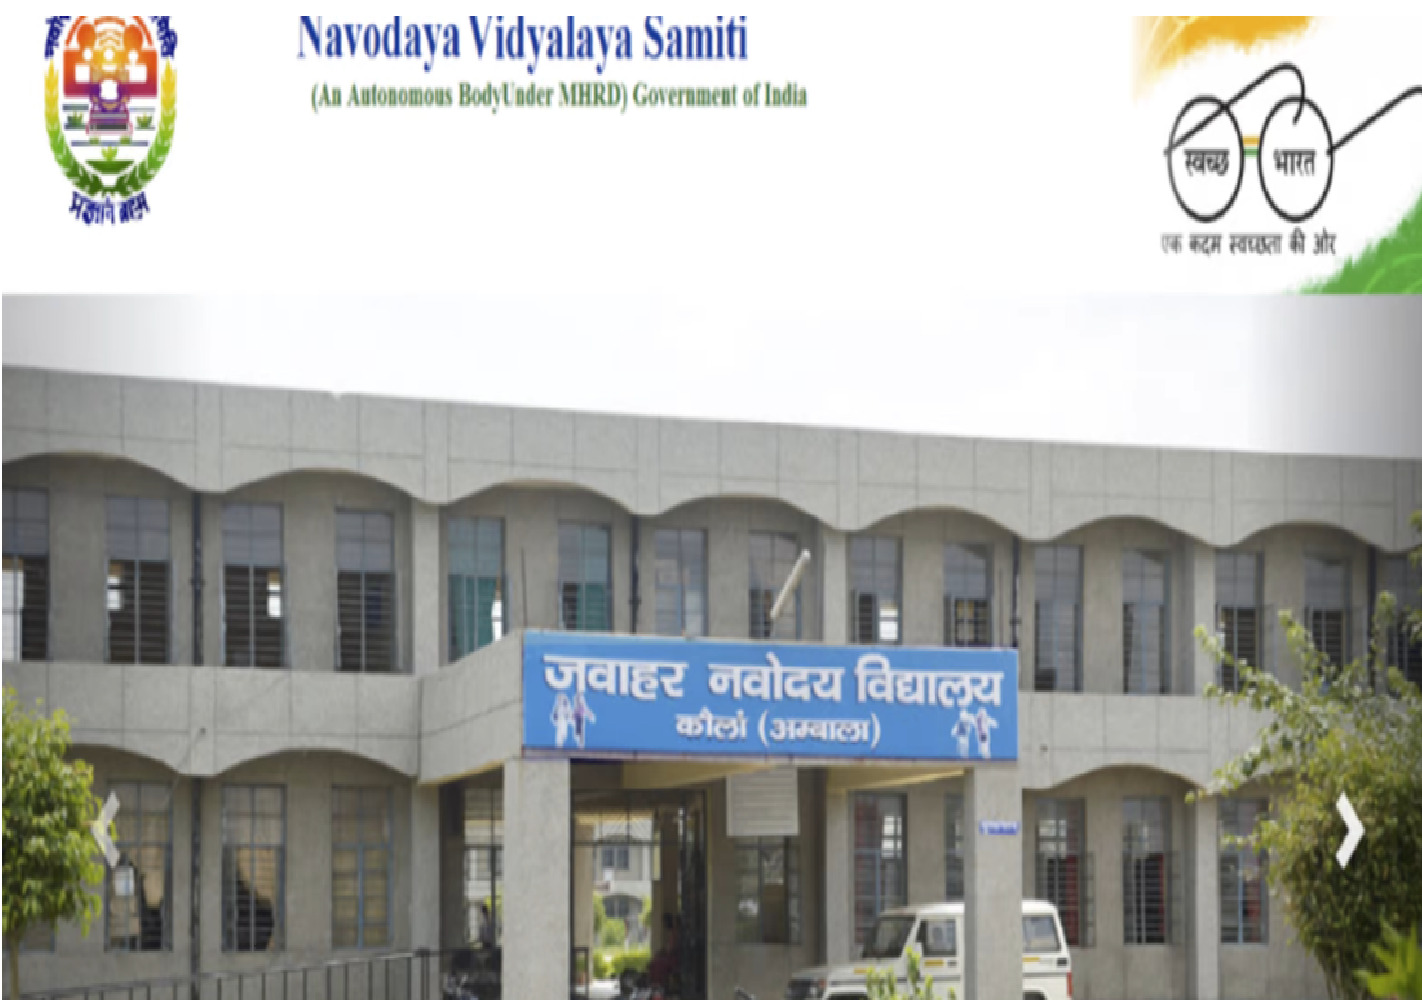 Application form has been released for admission in Navodaya Vidyalaya, how to apply